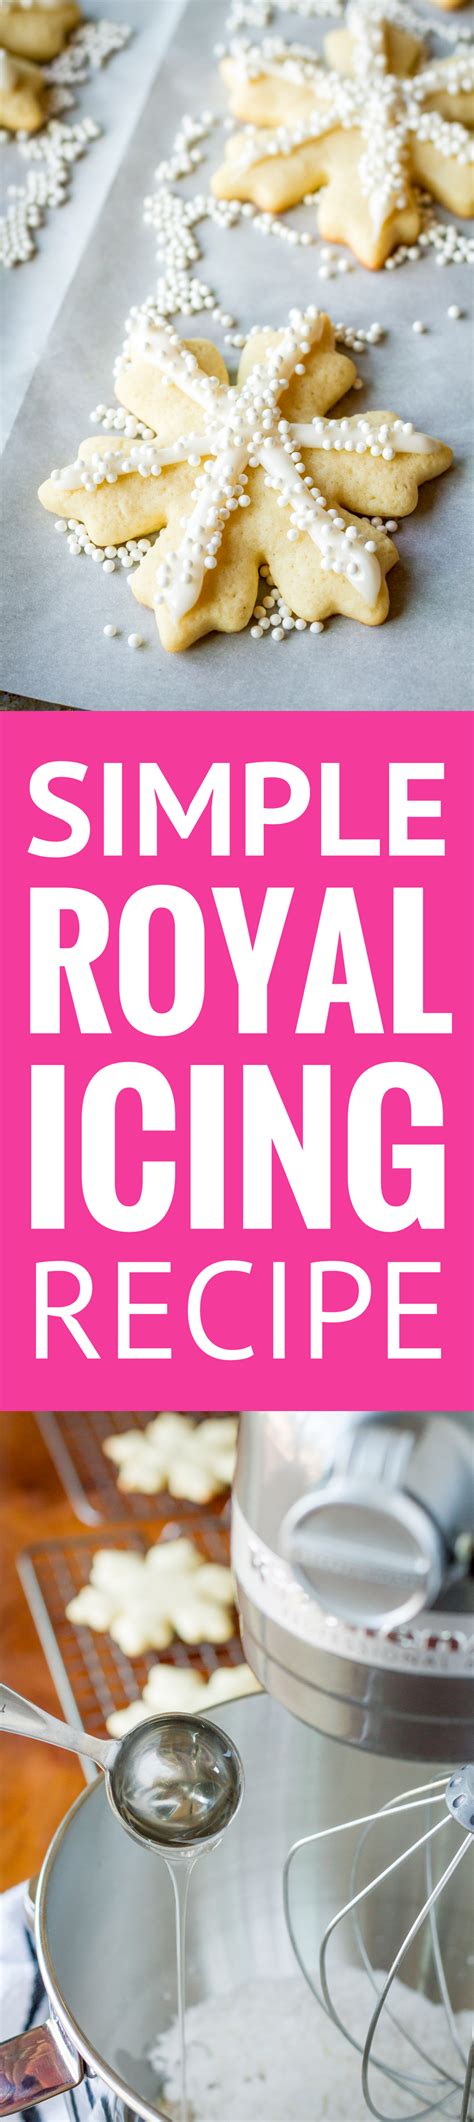 Confectioners' sugar, meringue powder, and water. Simple Royal Icing Recipe -- this royal icing is SO ridiculously easy to make! No egg whites, no ...